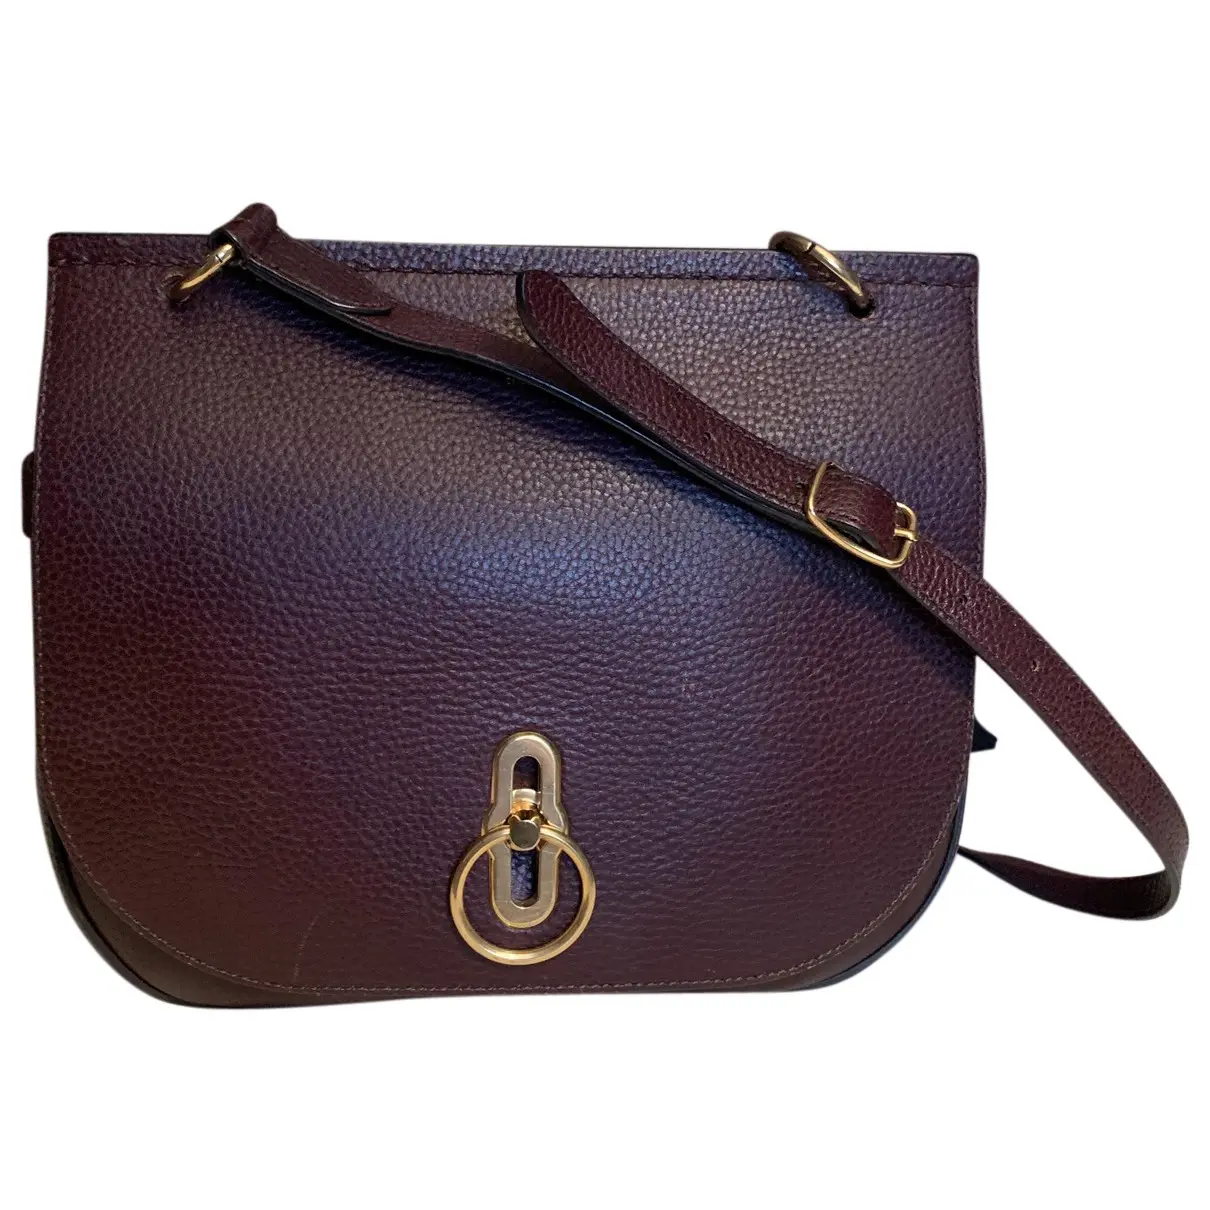 Amberley leather satchel Mulberry